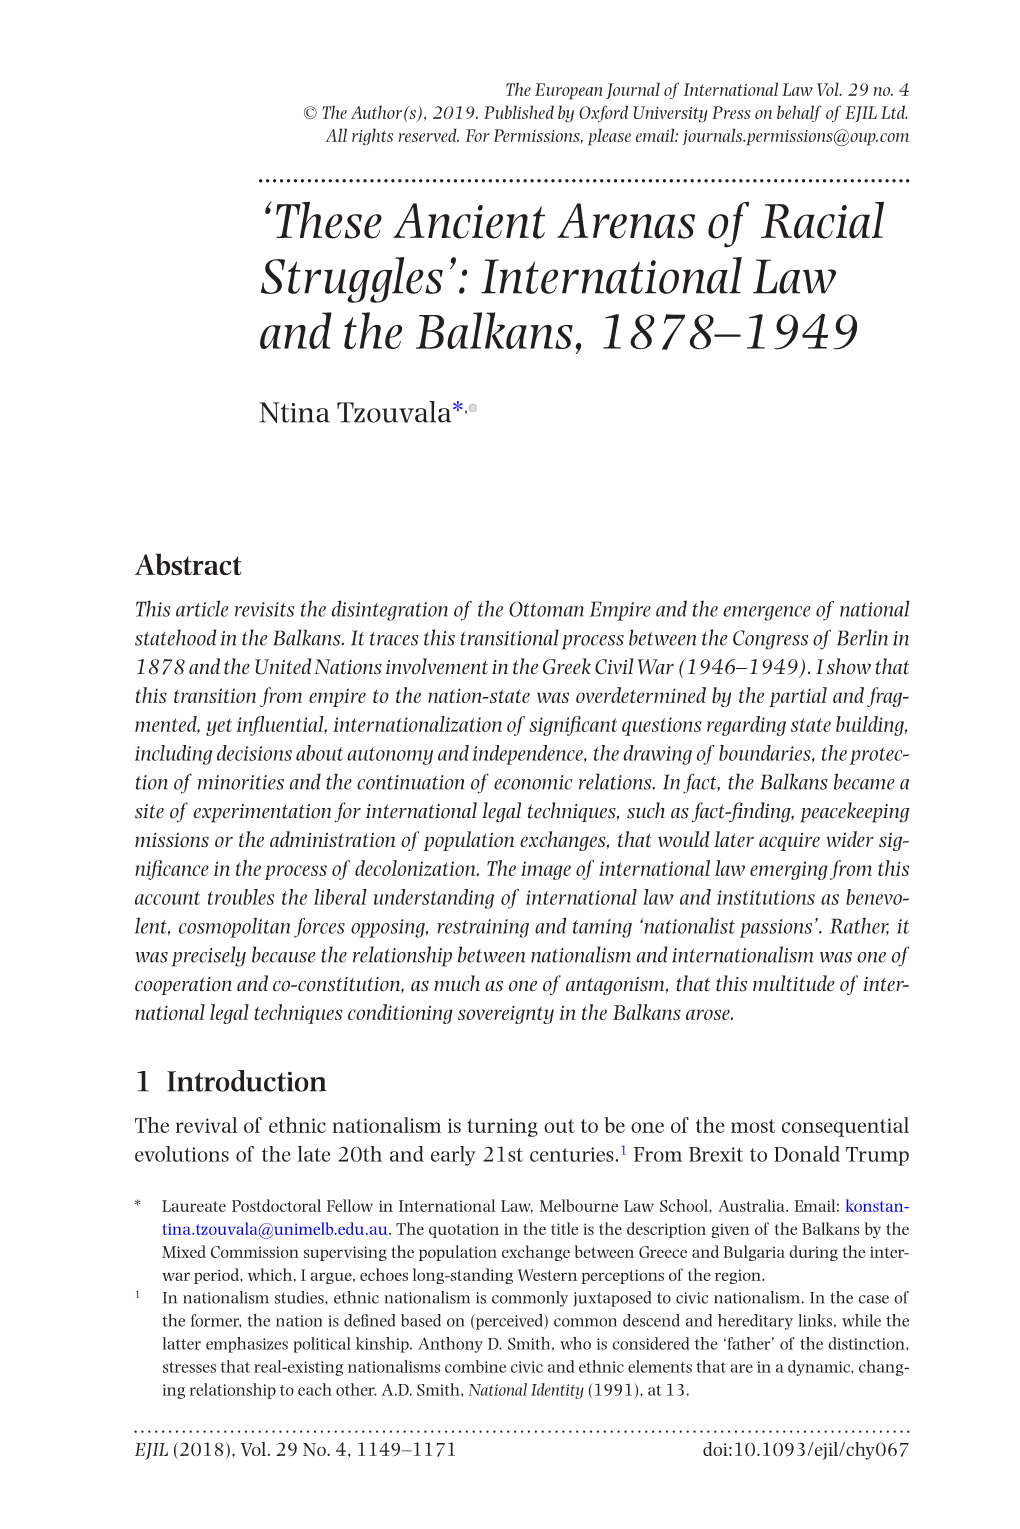 International Law and the Balkans, 1878–1949